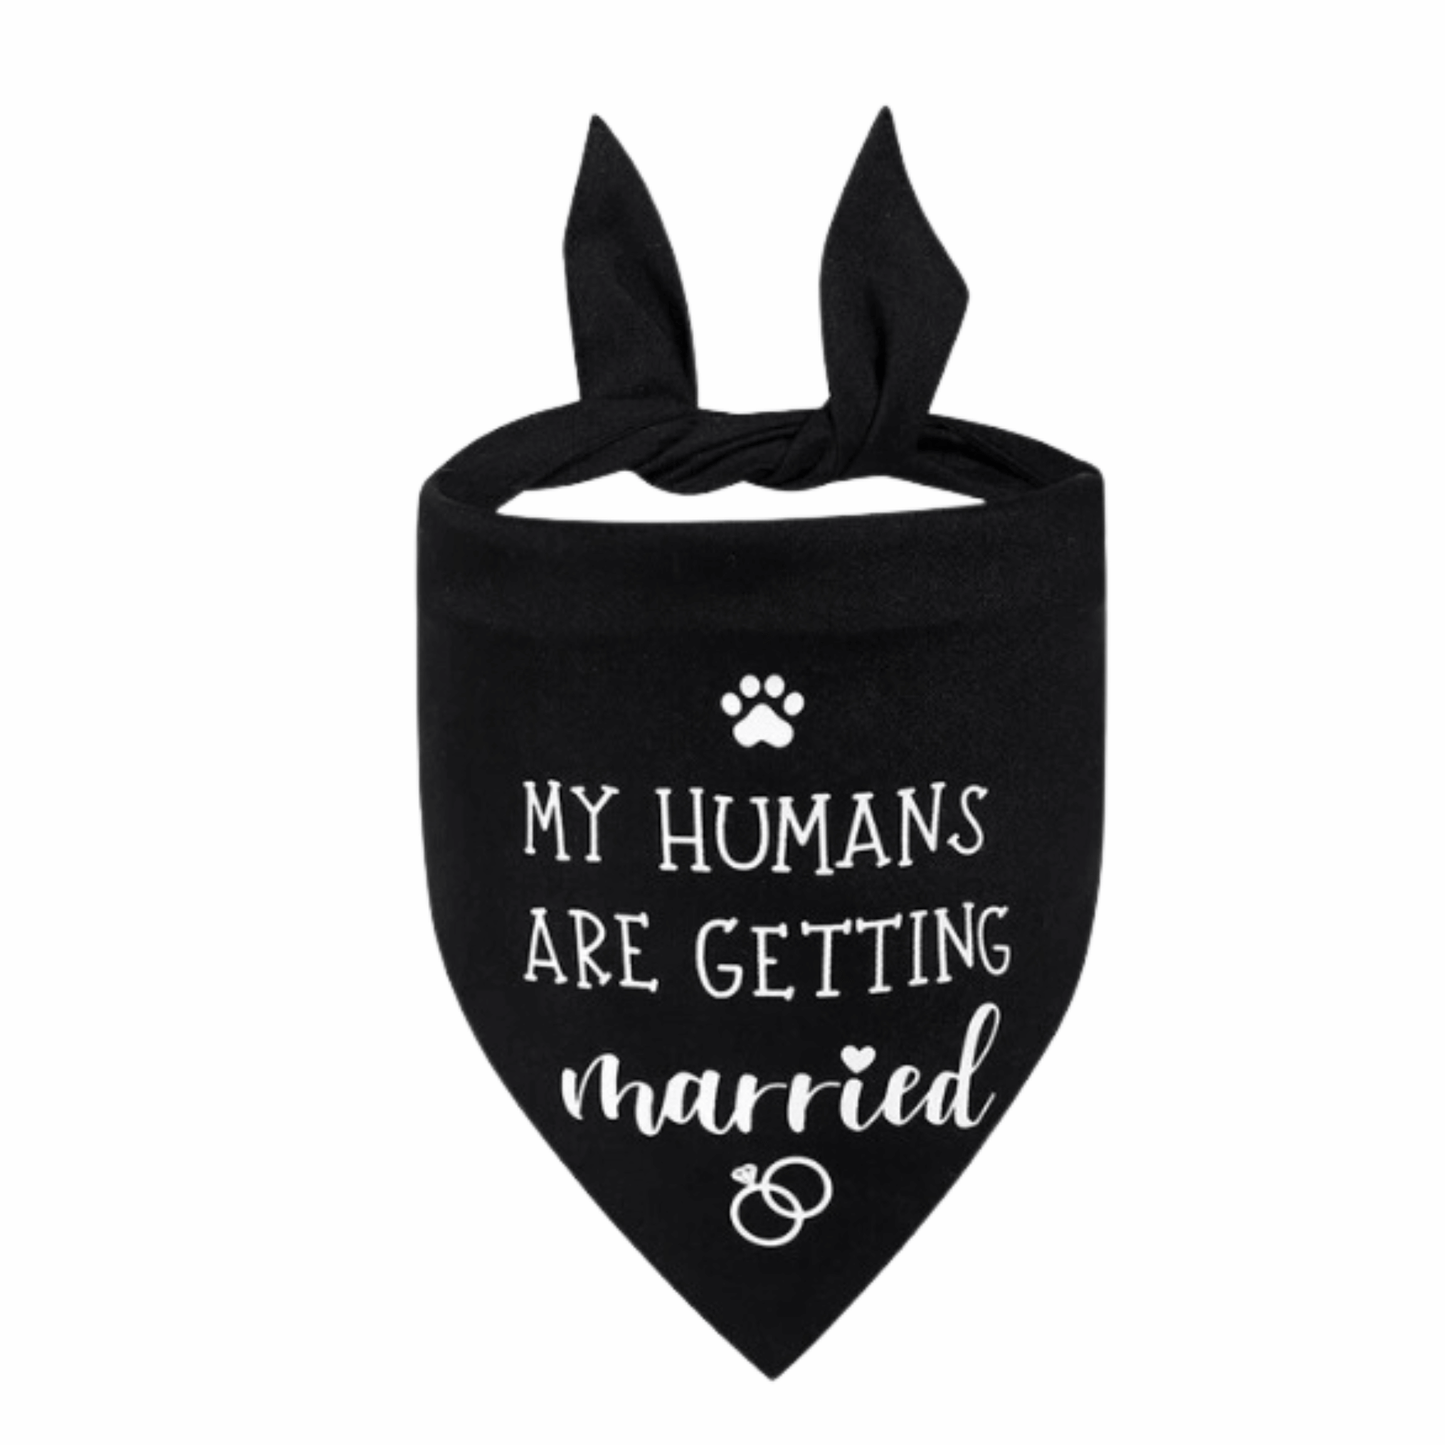 My Humans Are Getting Married ~ Wedding Dog Bandana Tie Up